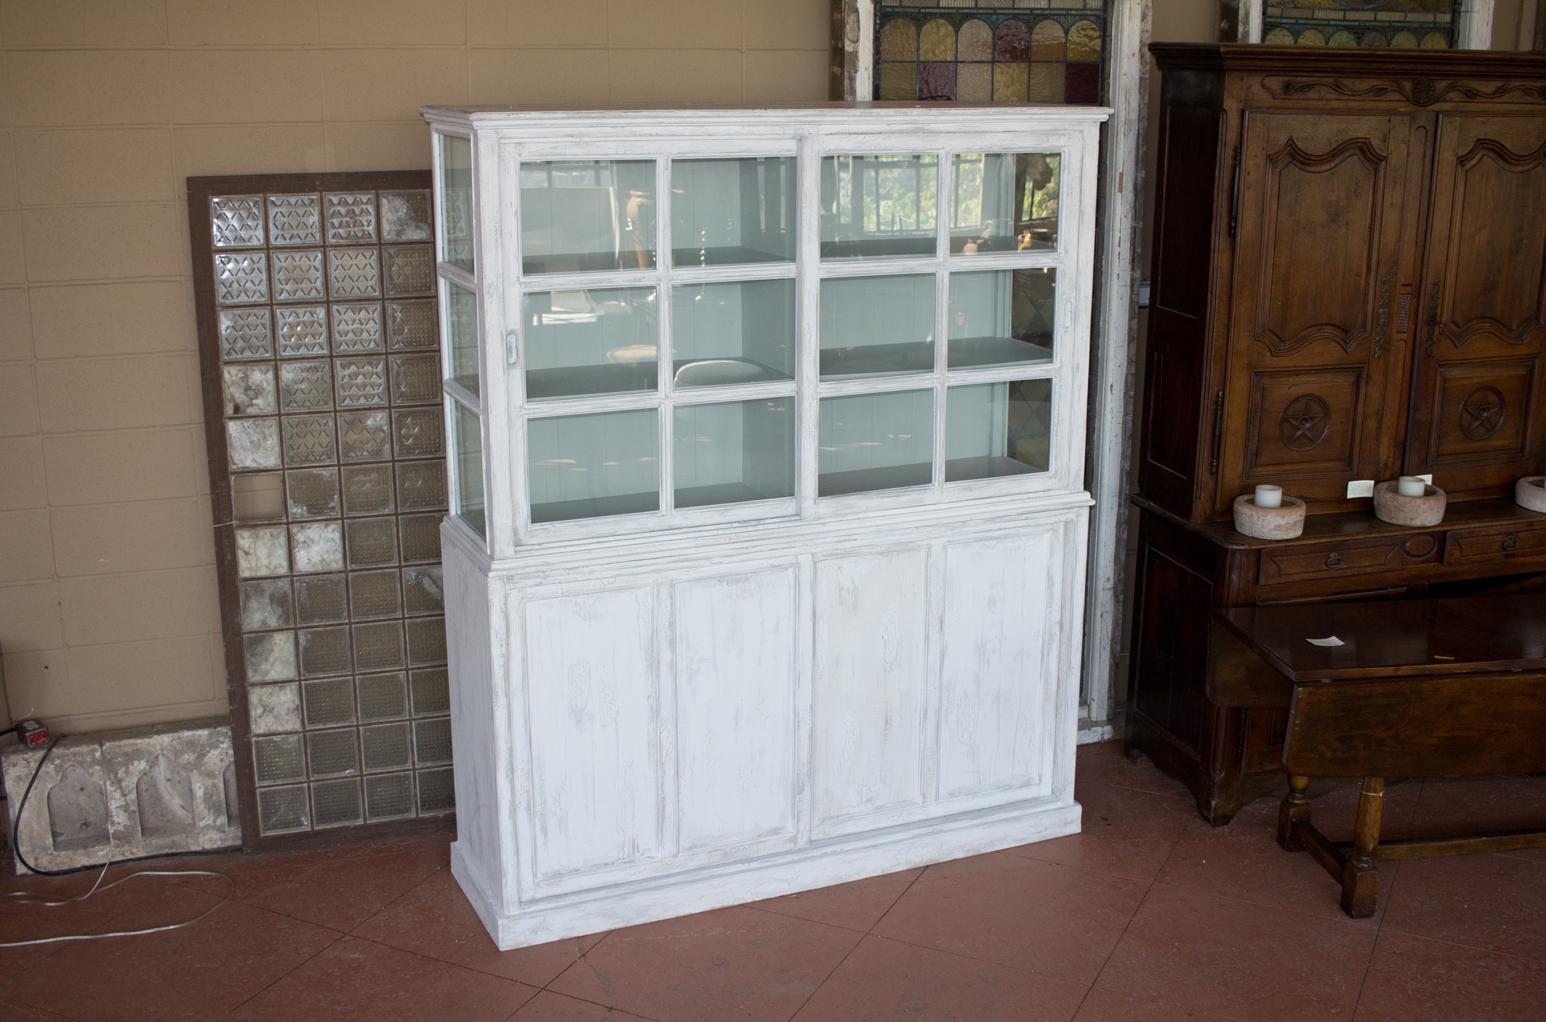 Substantial painted bookcase or cabinet. The top is unusual as it’s glazed both on the front and the sides, very attractive! The base of the cabinet is spacious with plenty of storage space. Both top and bottom have sliding doors.

Early 20th